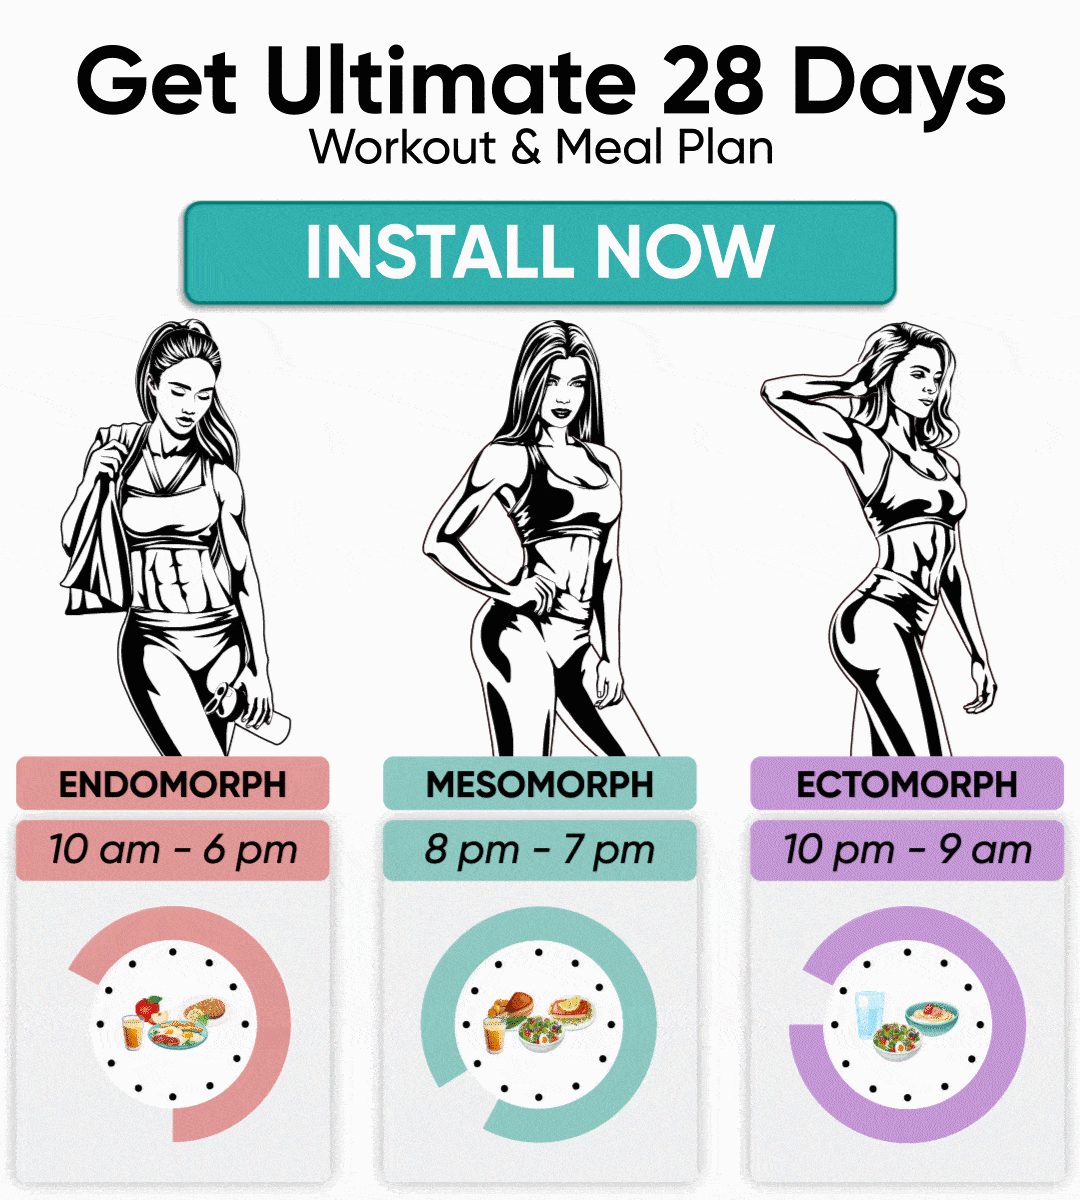 Get Ultimate 28 Days Workout Meal Plan